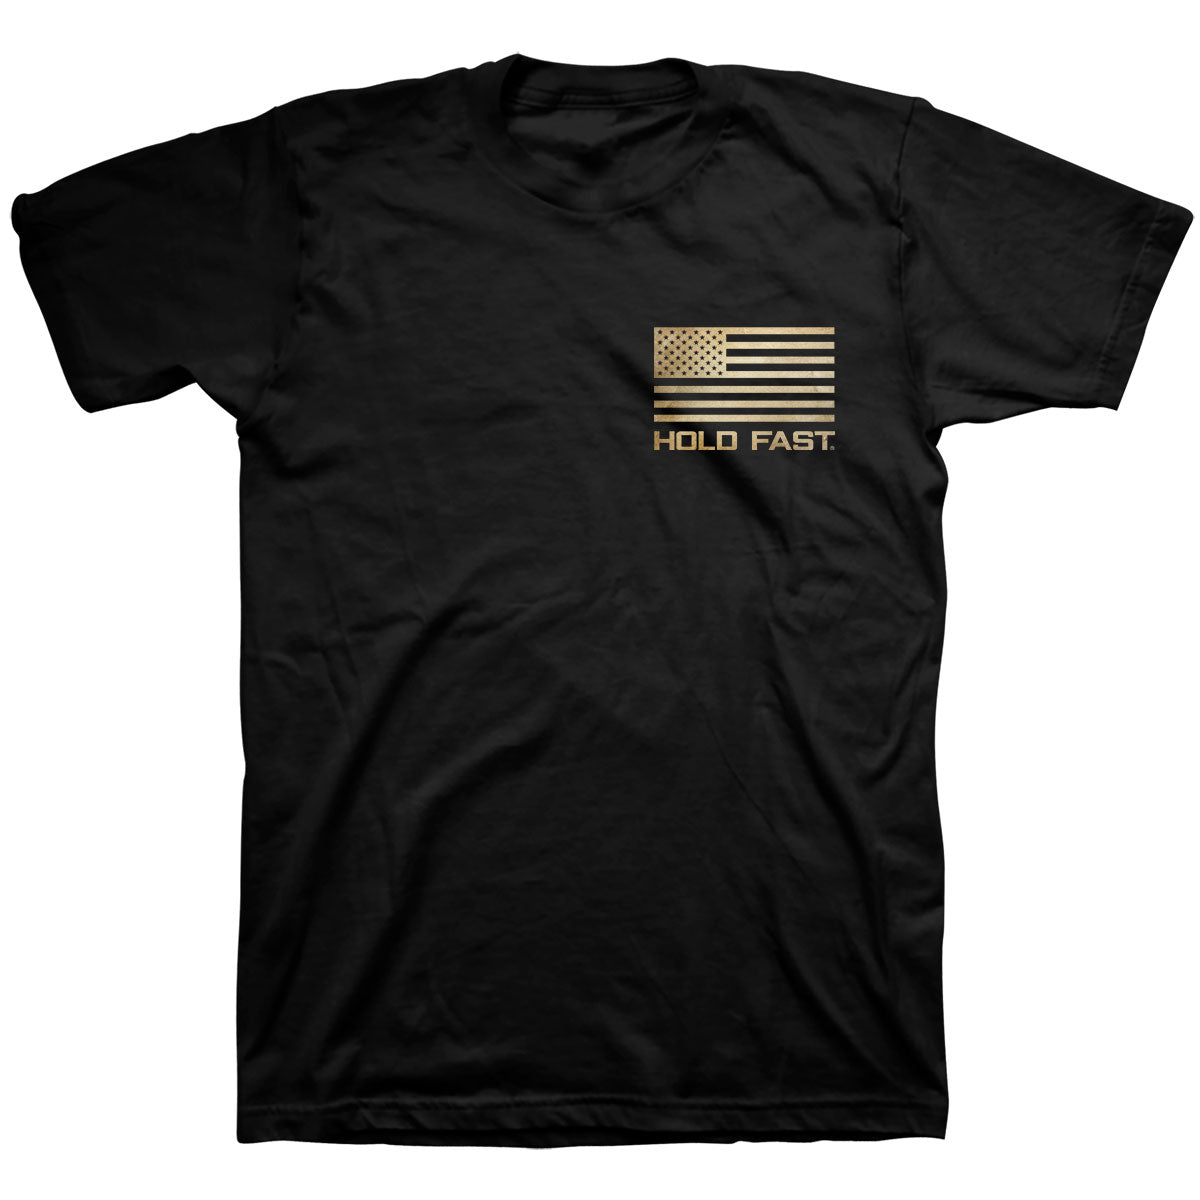 HOLD FAST Mens T-Shirt The United States Constitution